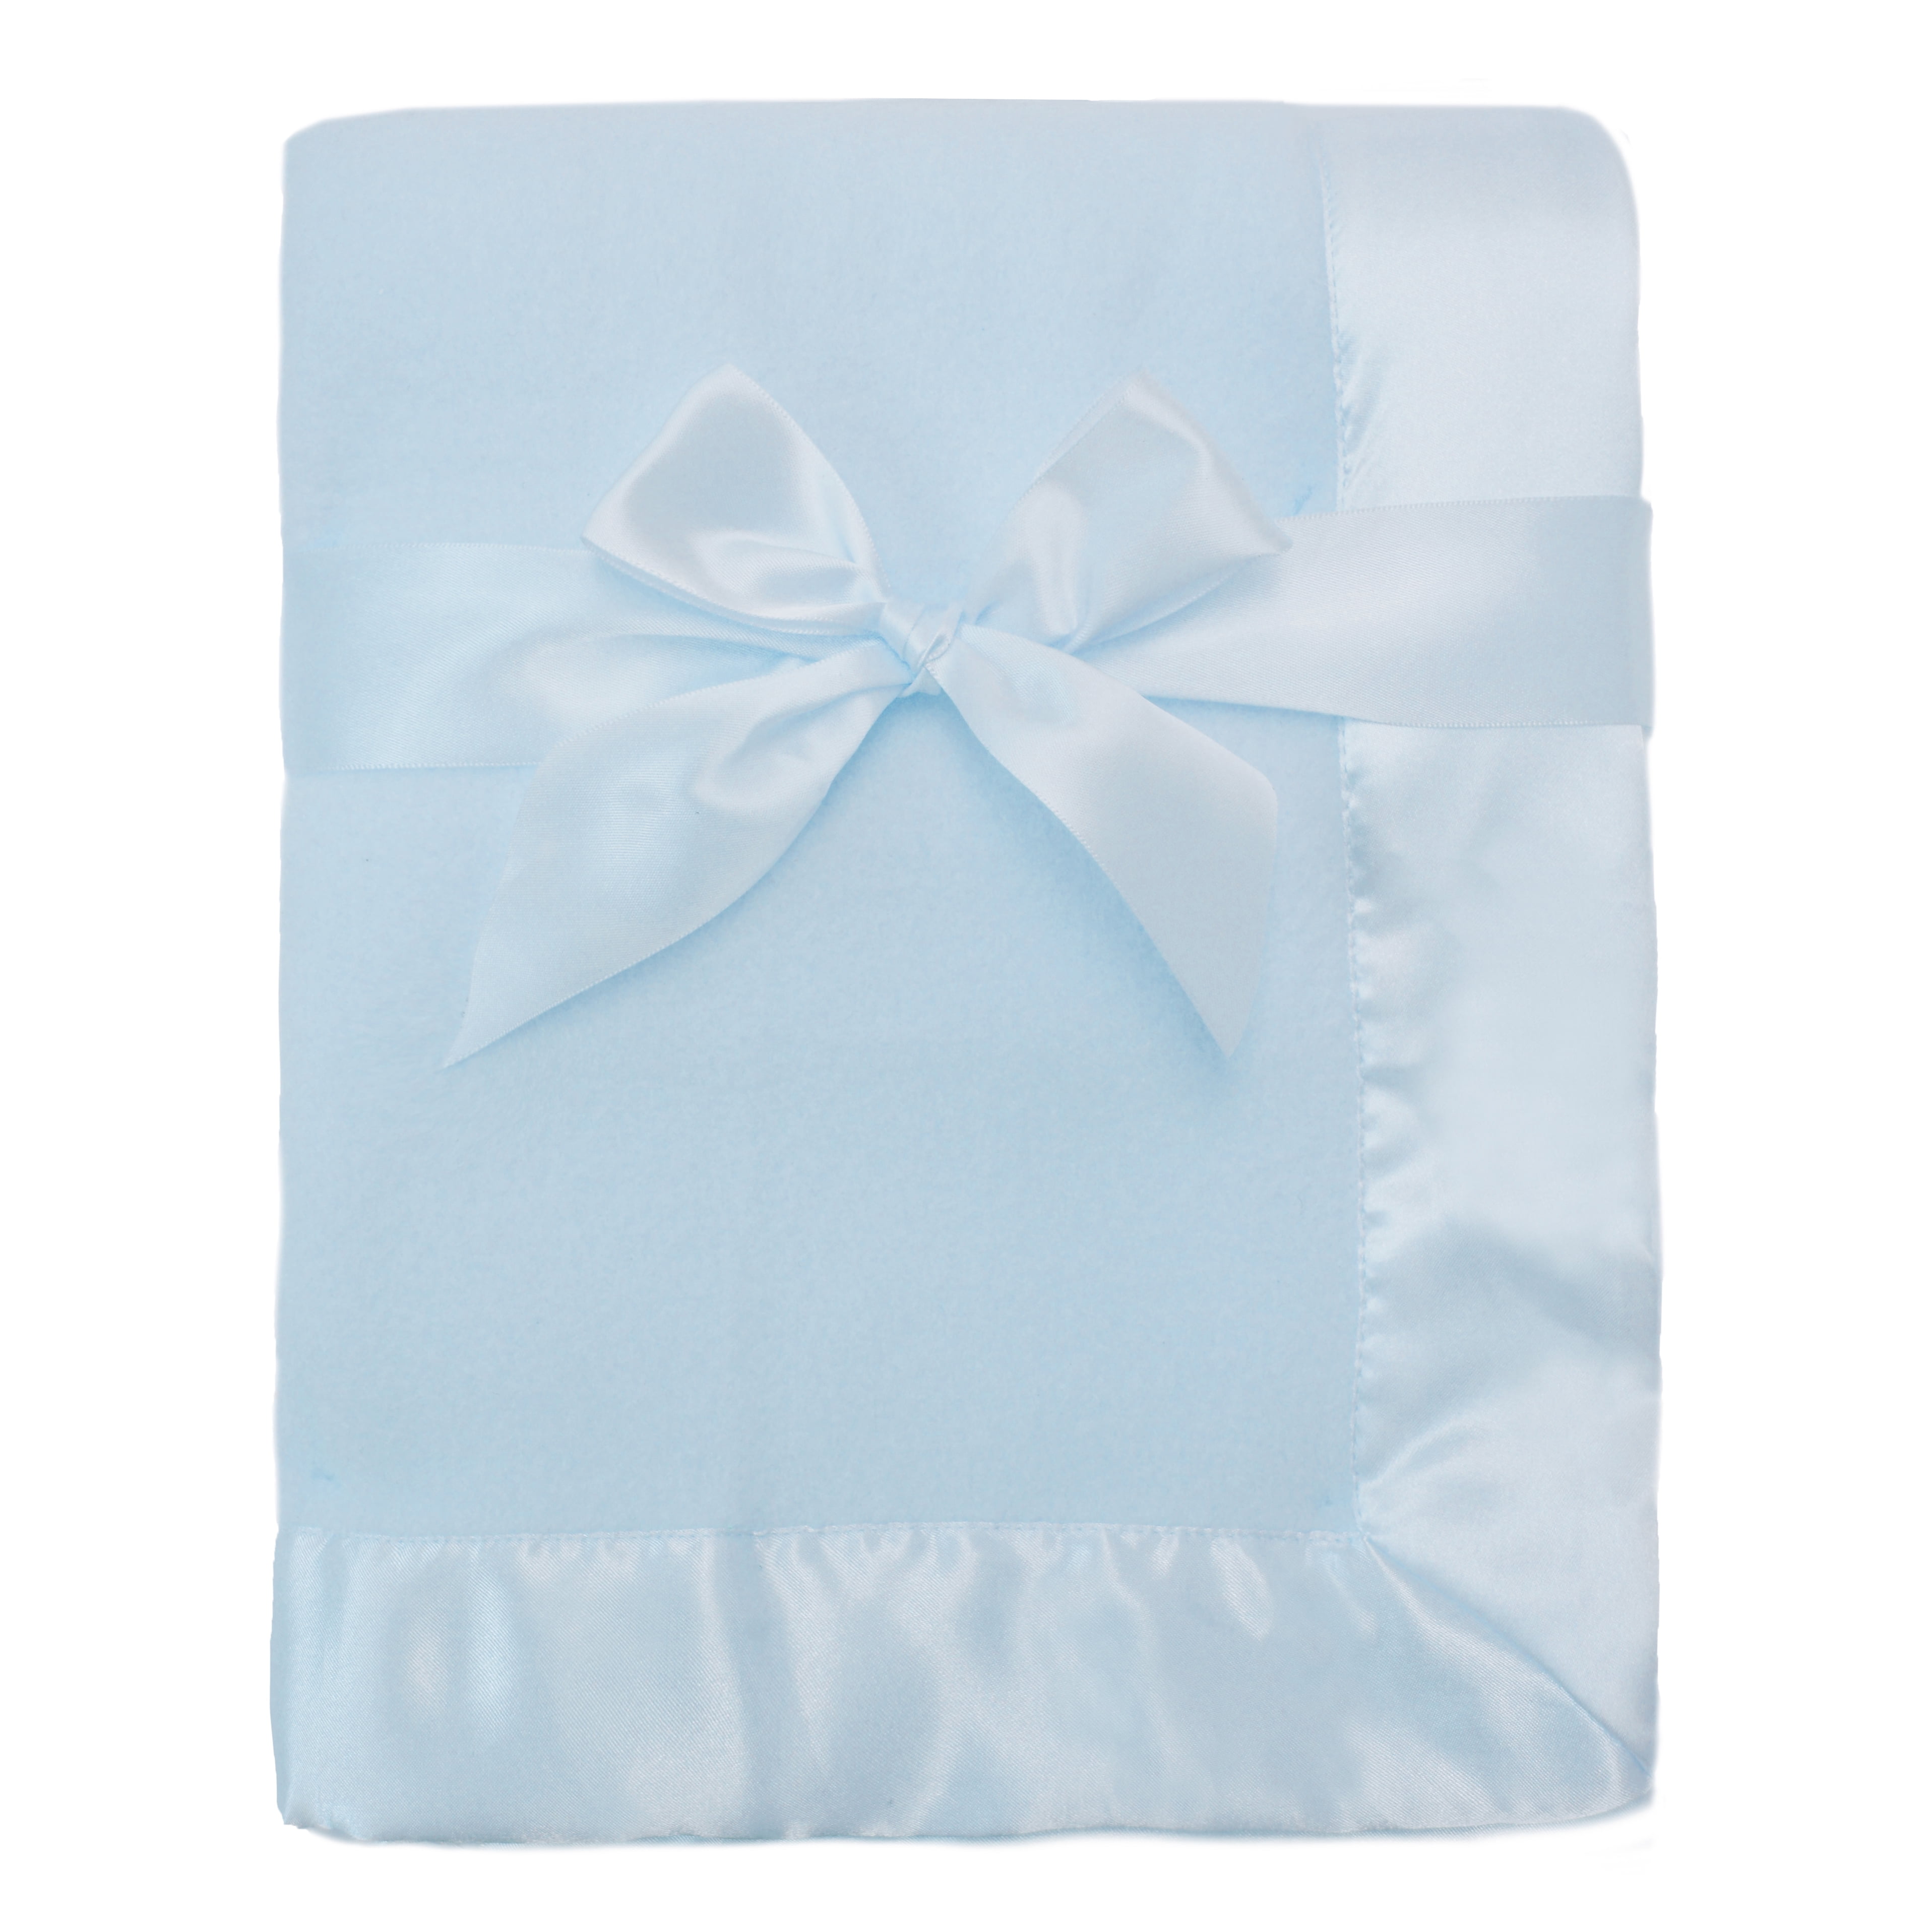 Solid Blue and Trucks Play Zone Reversible Satin Baby Blanket 30x40